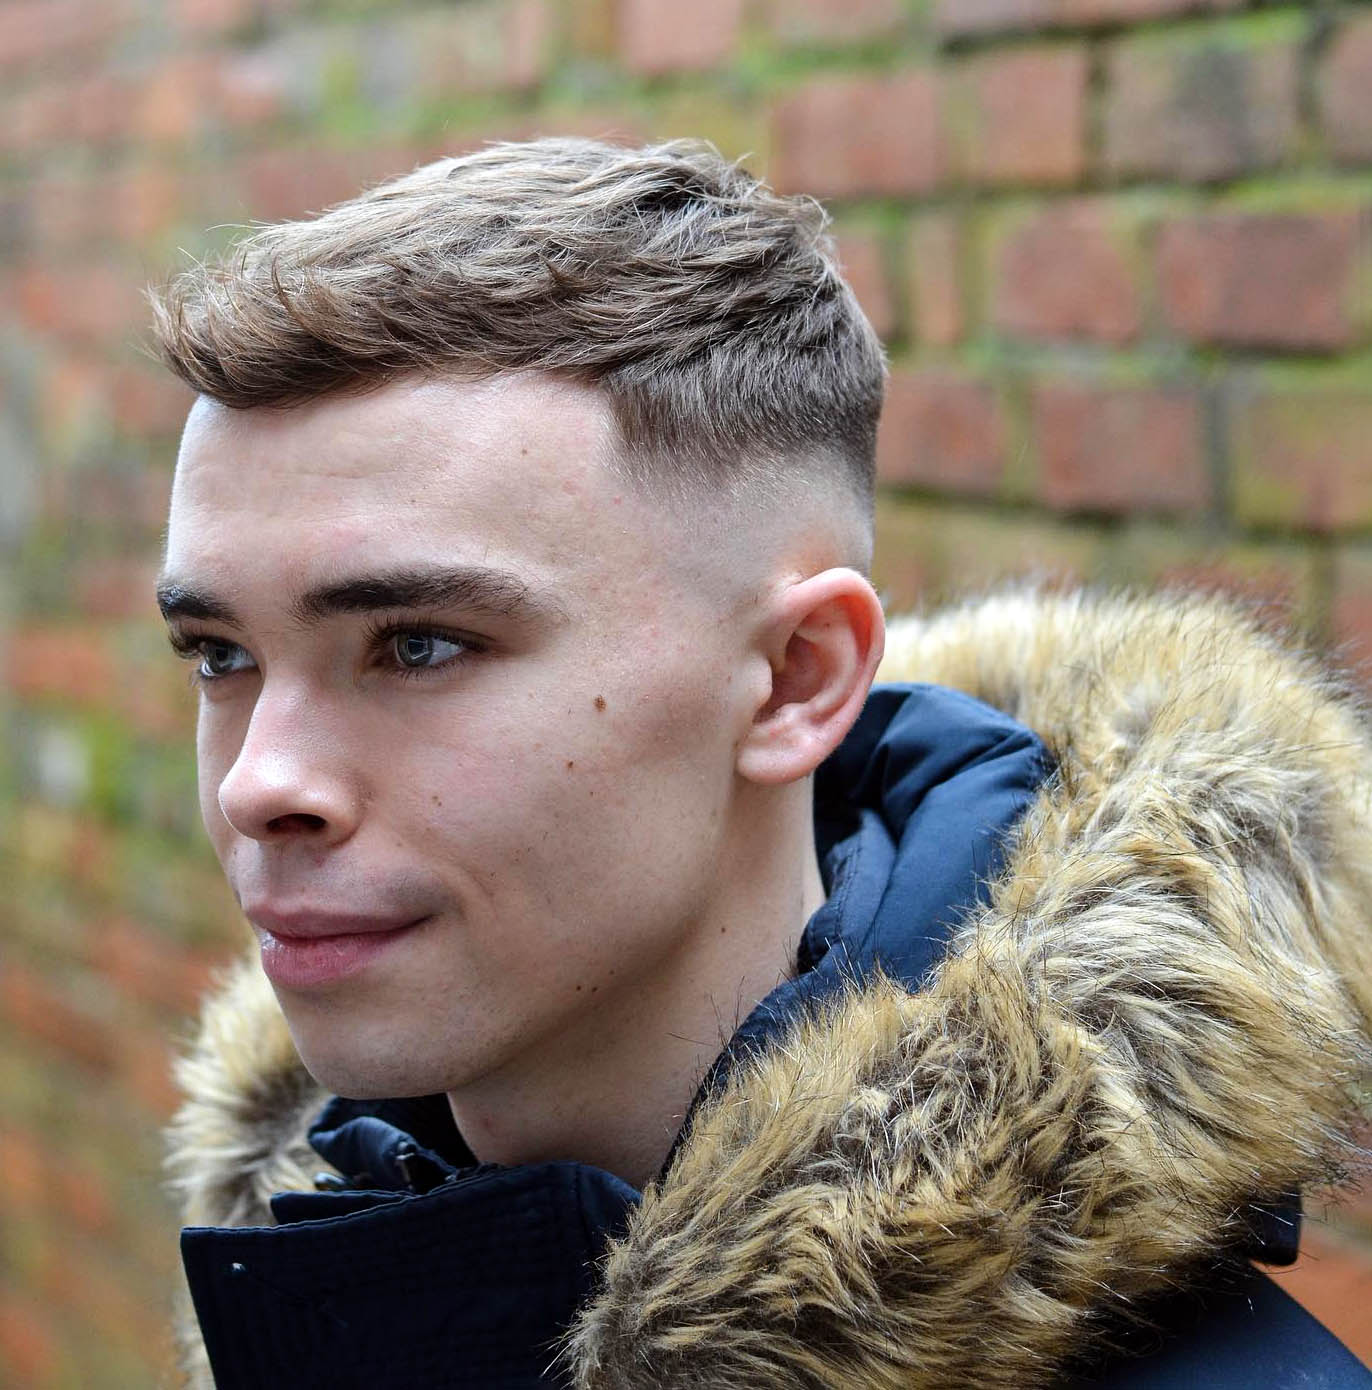 High Taper Fade with Short Spiked Up Fringe